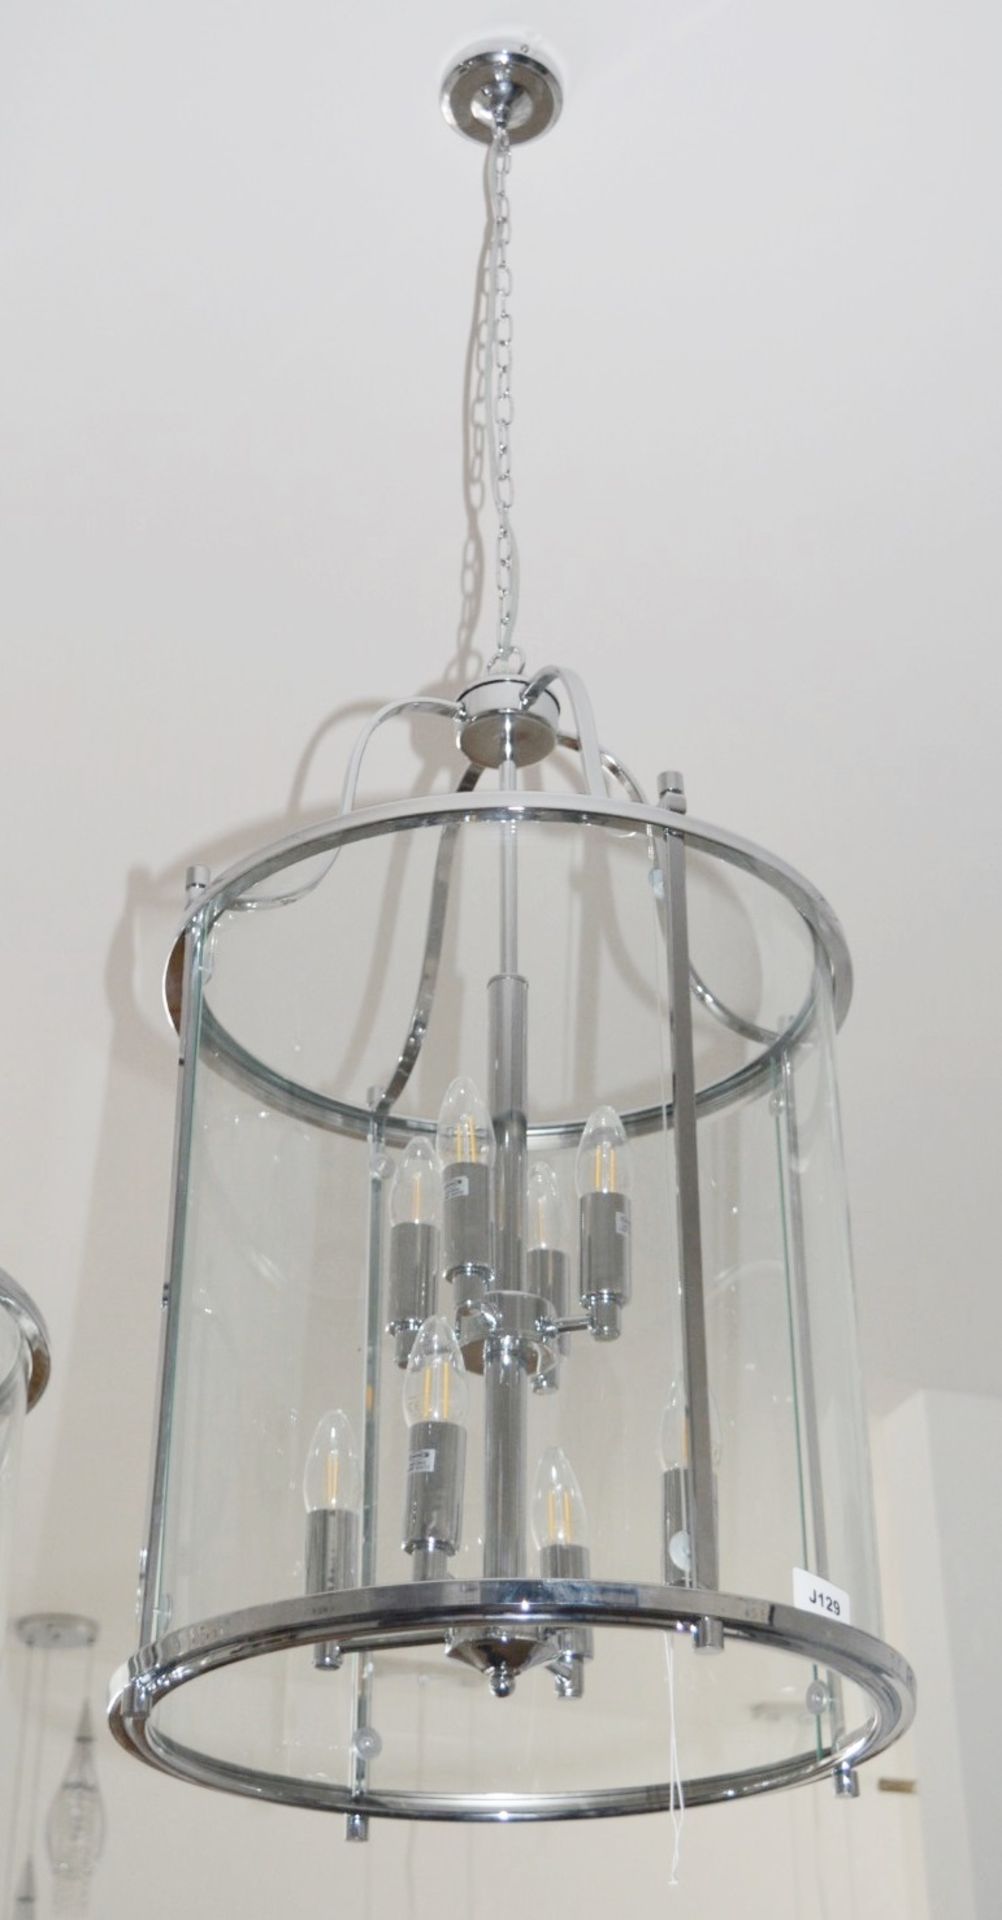 1 x Victorian Lantern Chrome 8-Light Ceiling Fitting With Clear Glass Panels - RRP £576.00 - Image 4 of 5